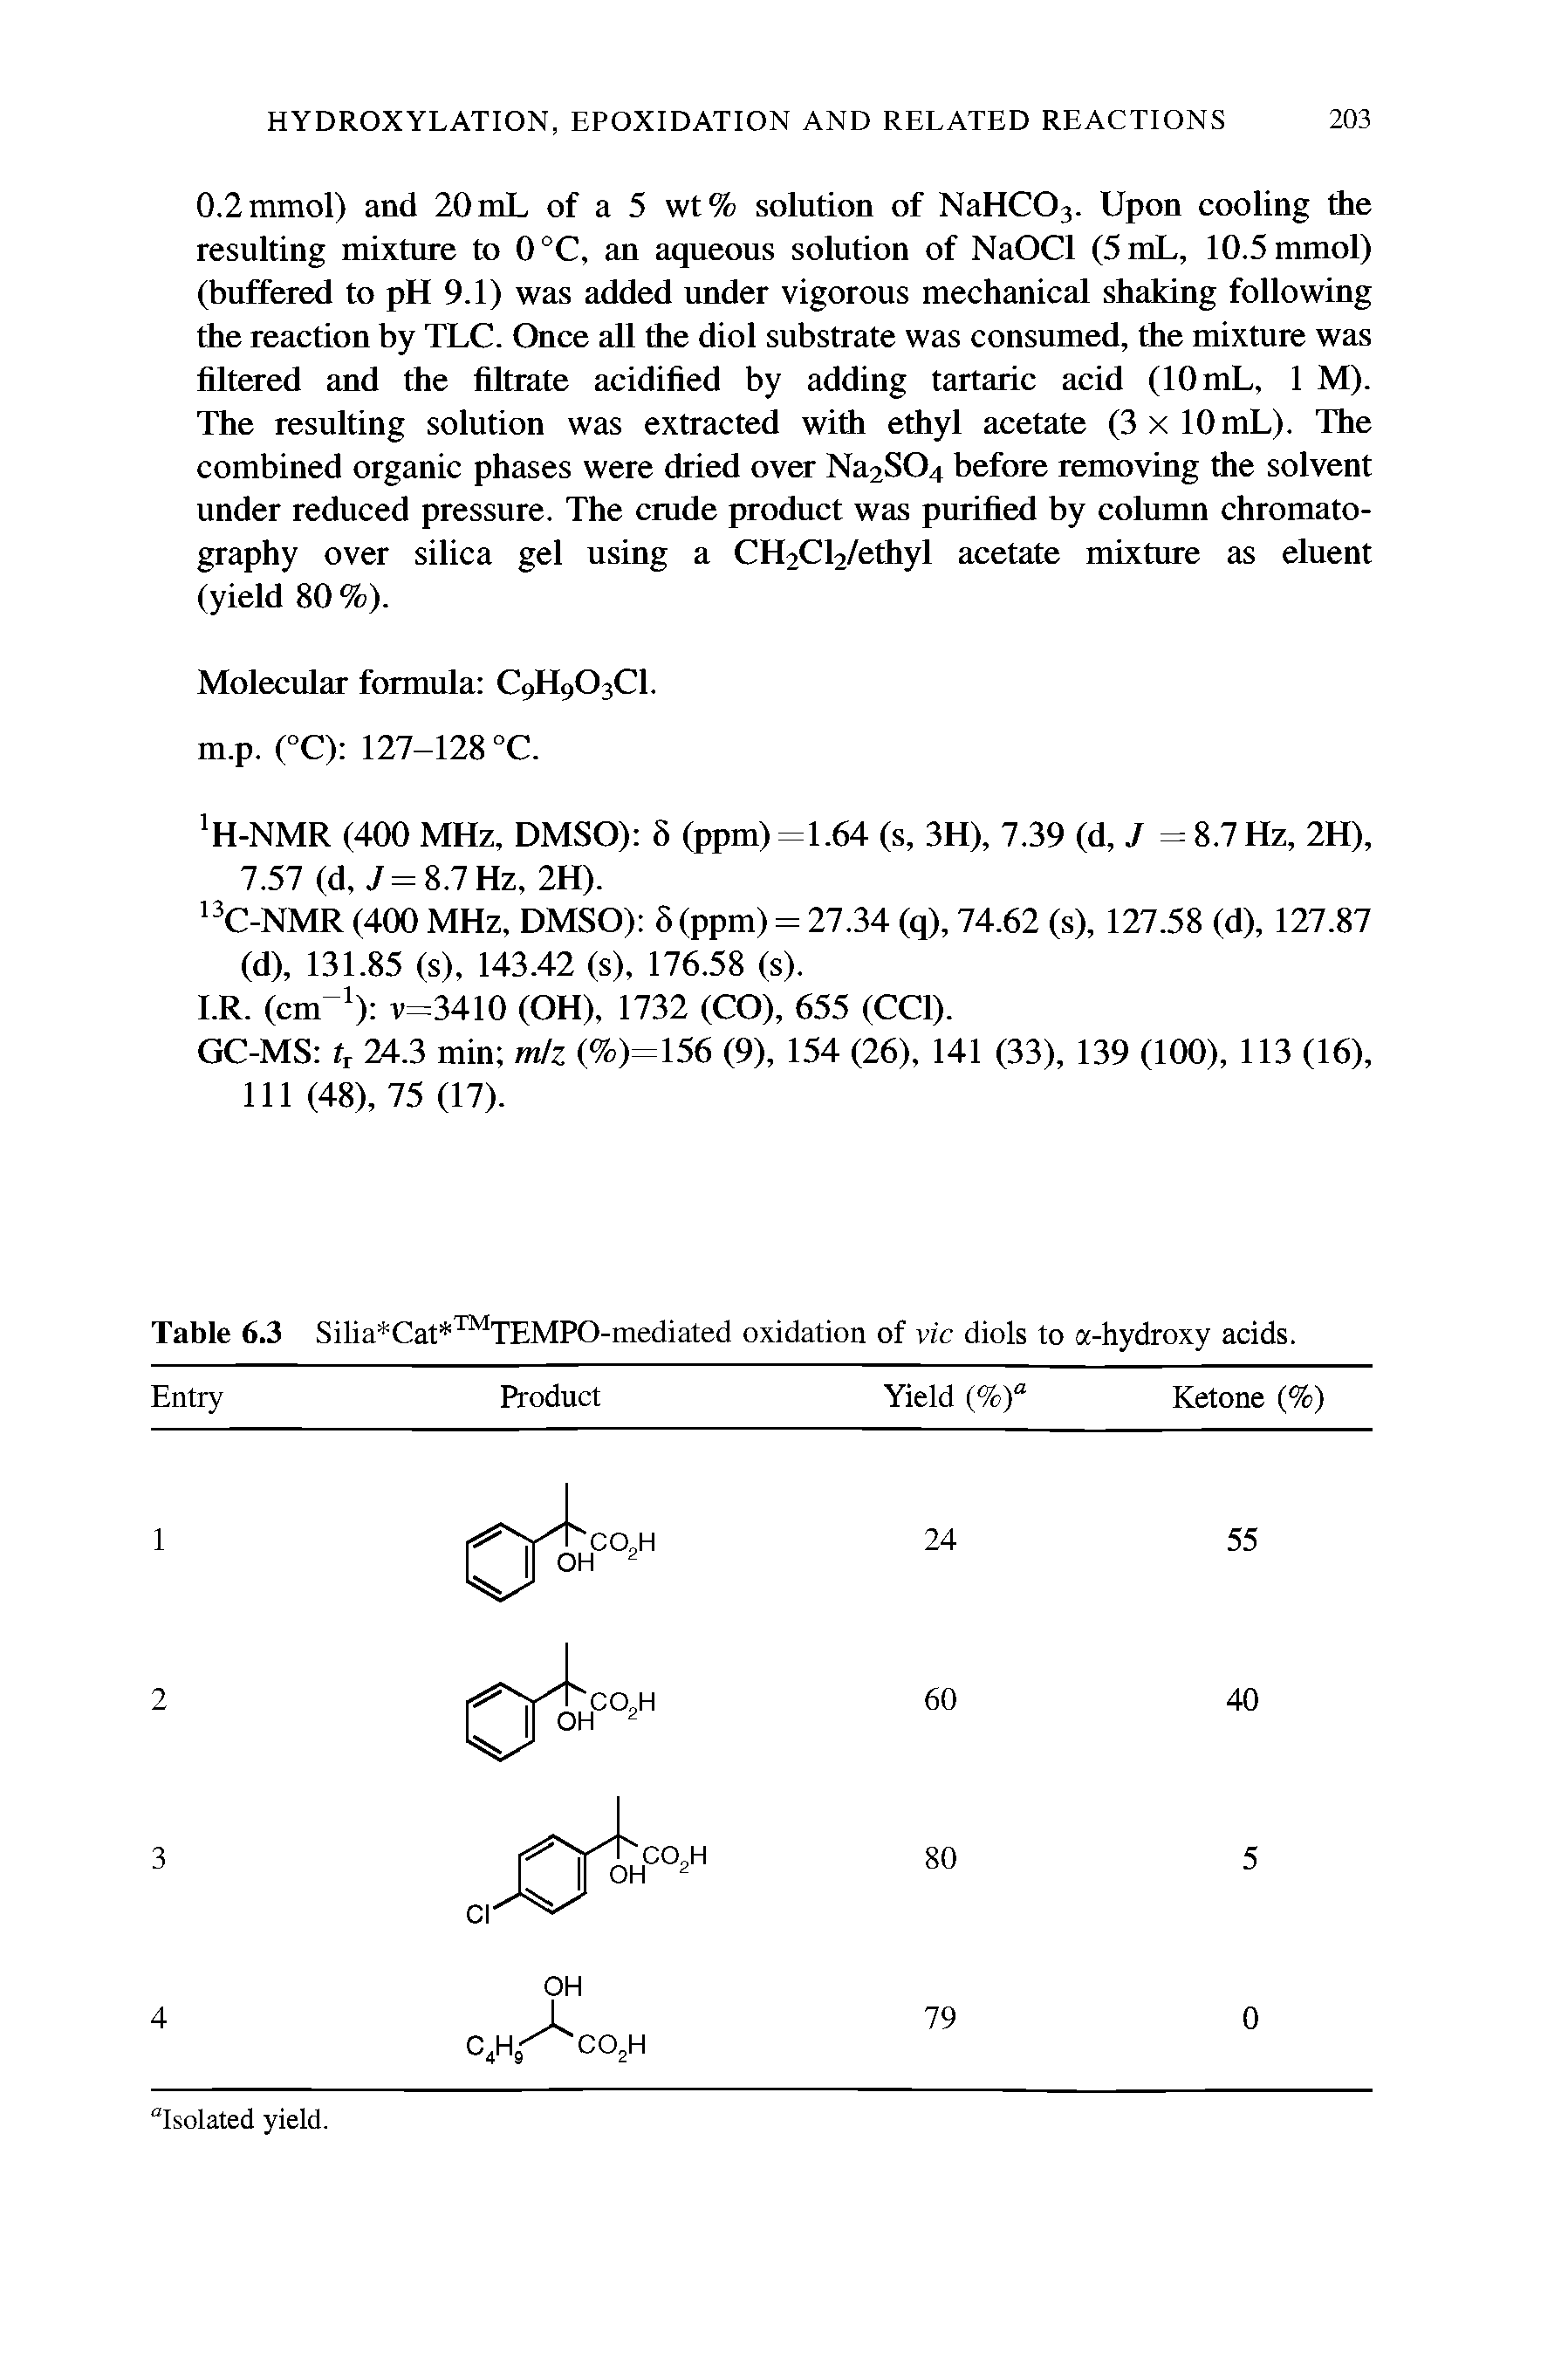 Table 6.3 Silia Cat TEMPO-mediated oxidation of vie diols to a-hydroxy acids.